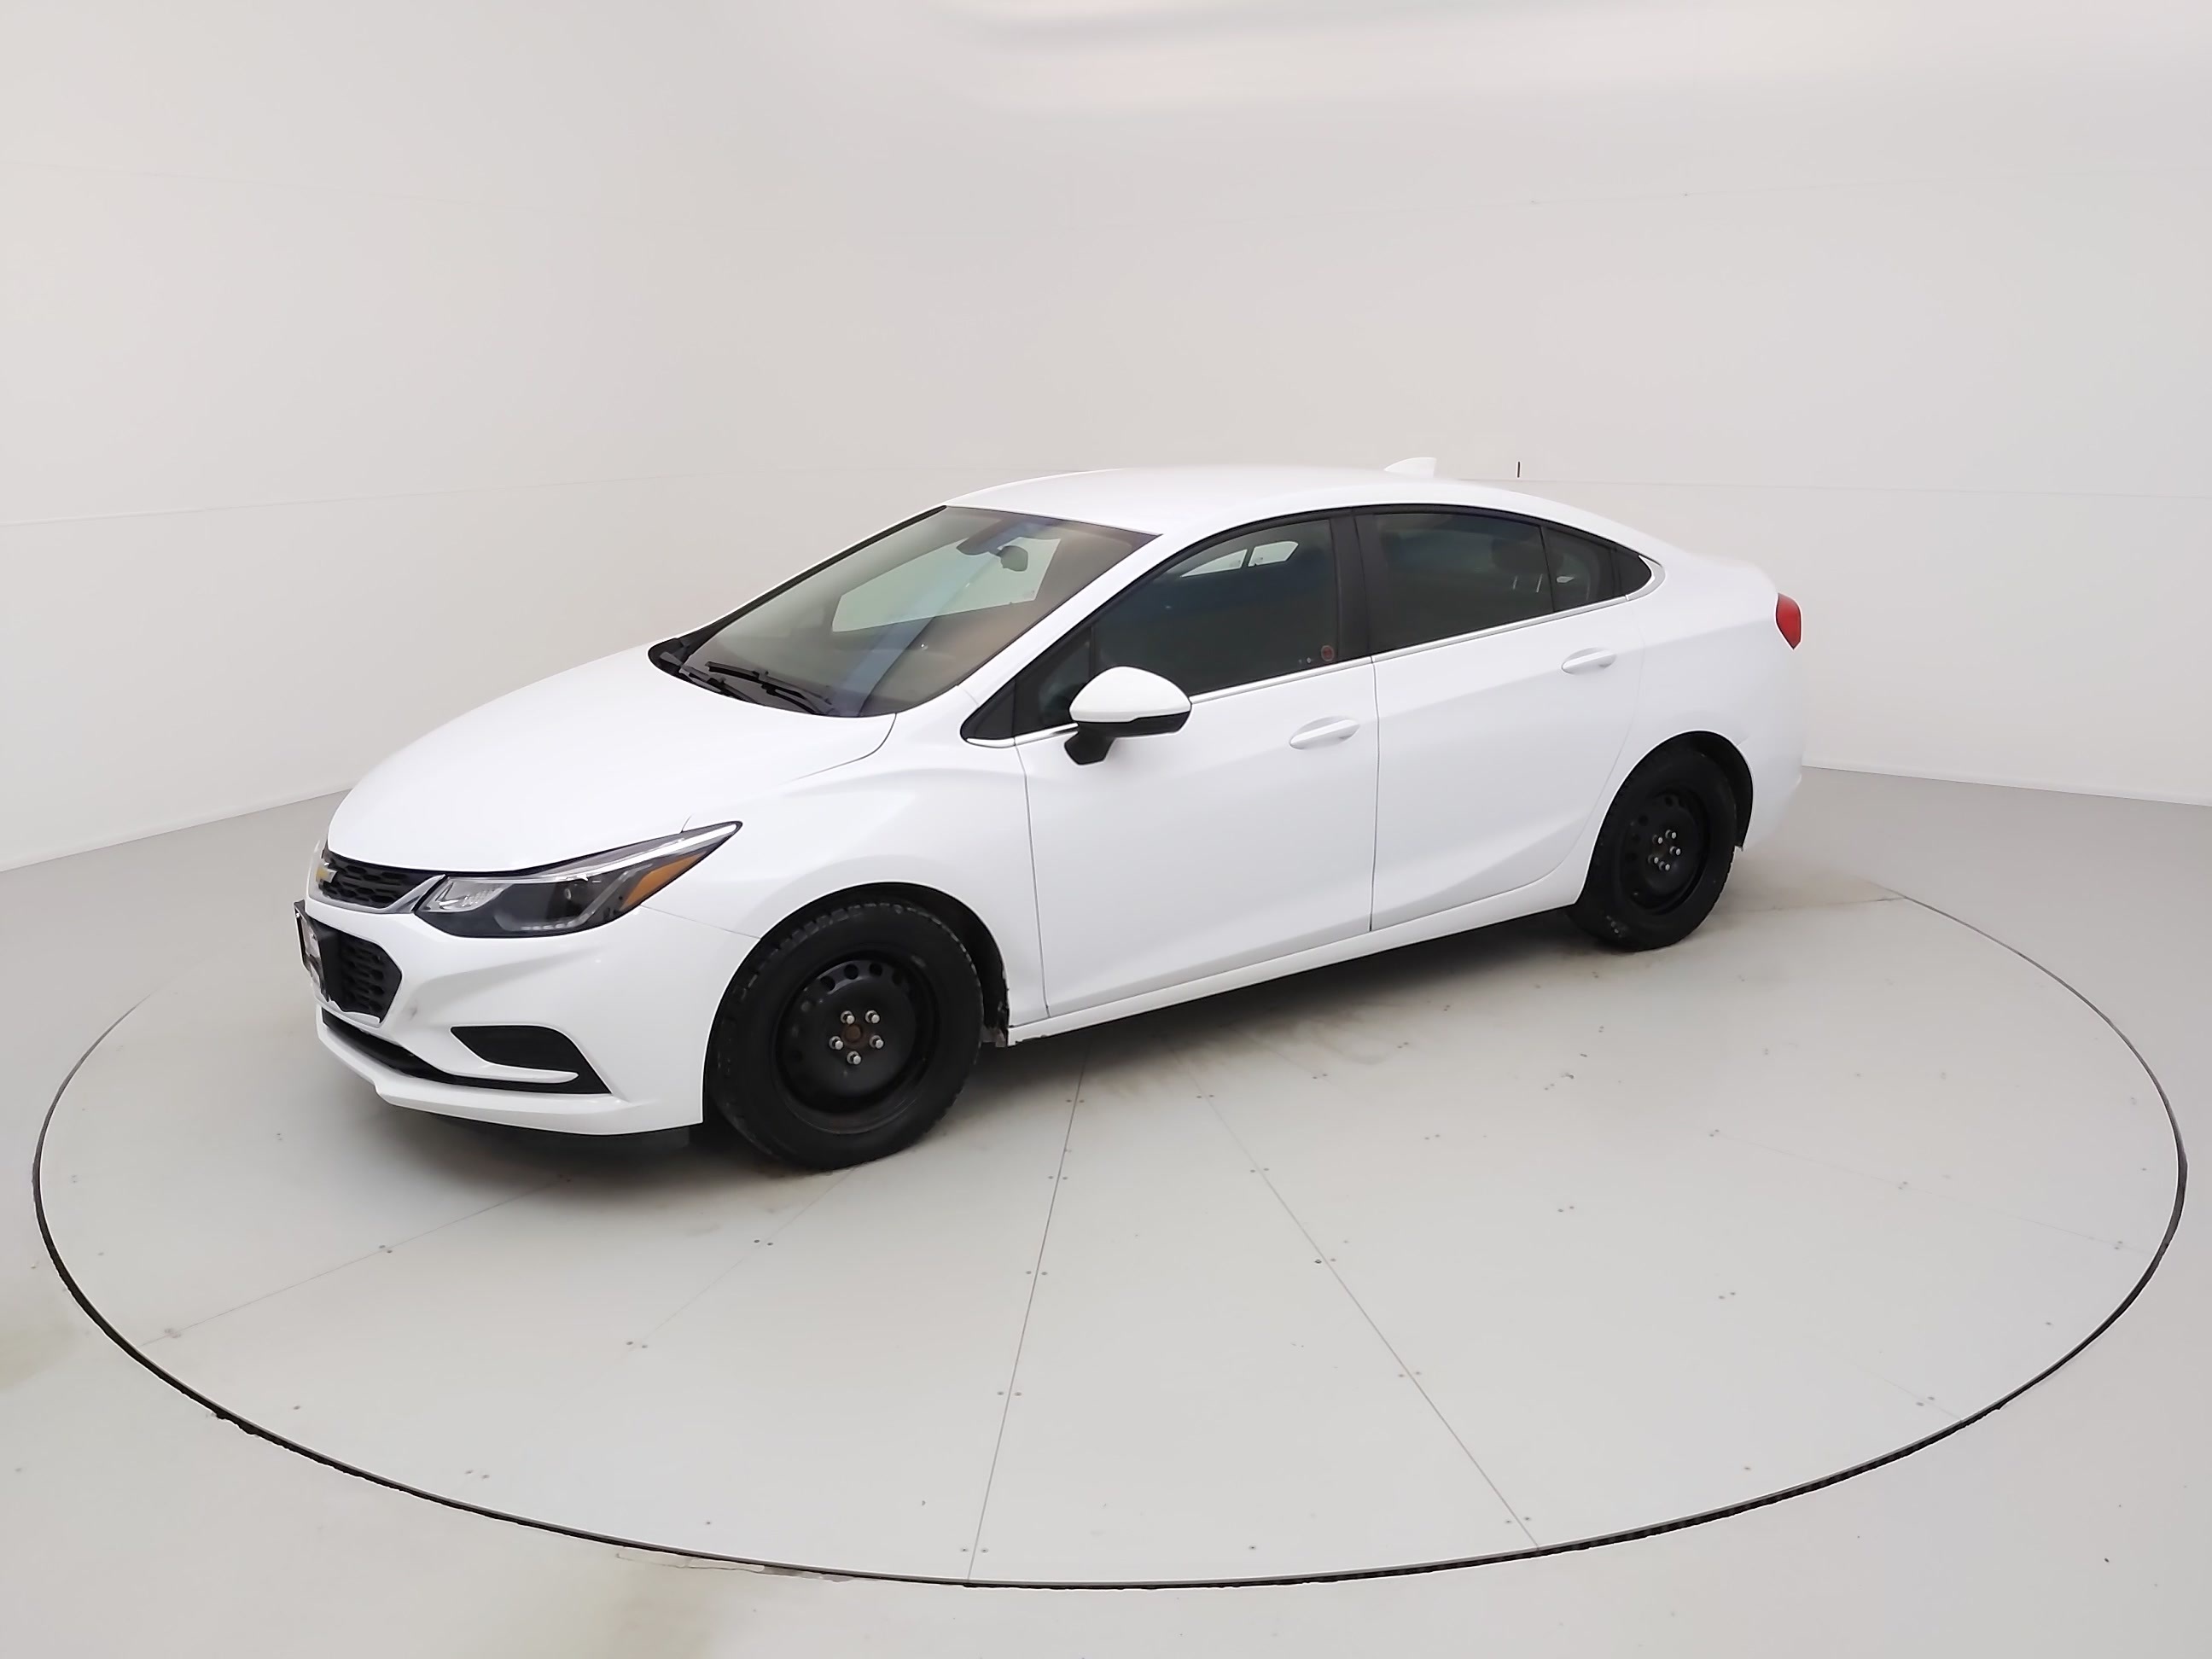 2018 Chevrolet Cruze 4dr Sdn 1.4L LT  SAFETIED !! as is for body !!